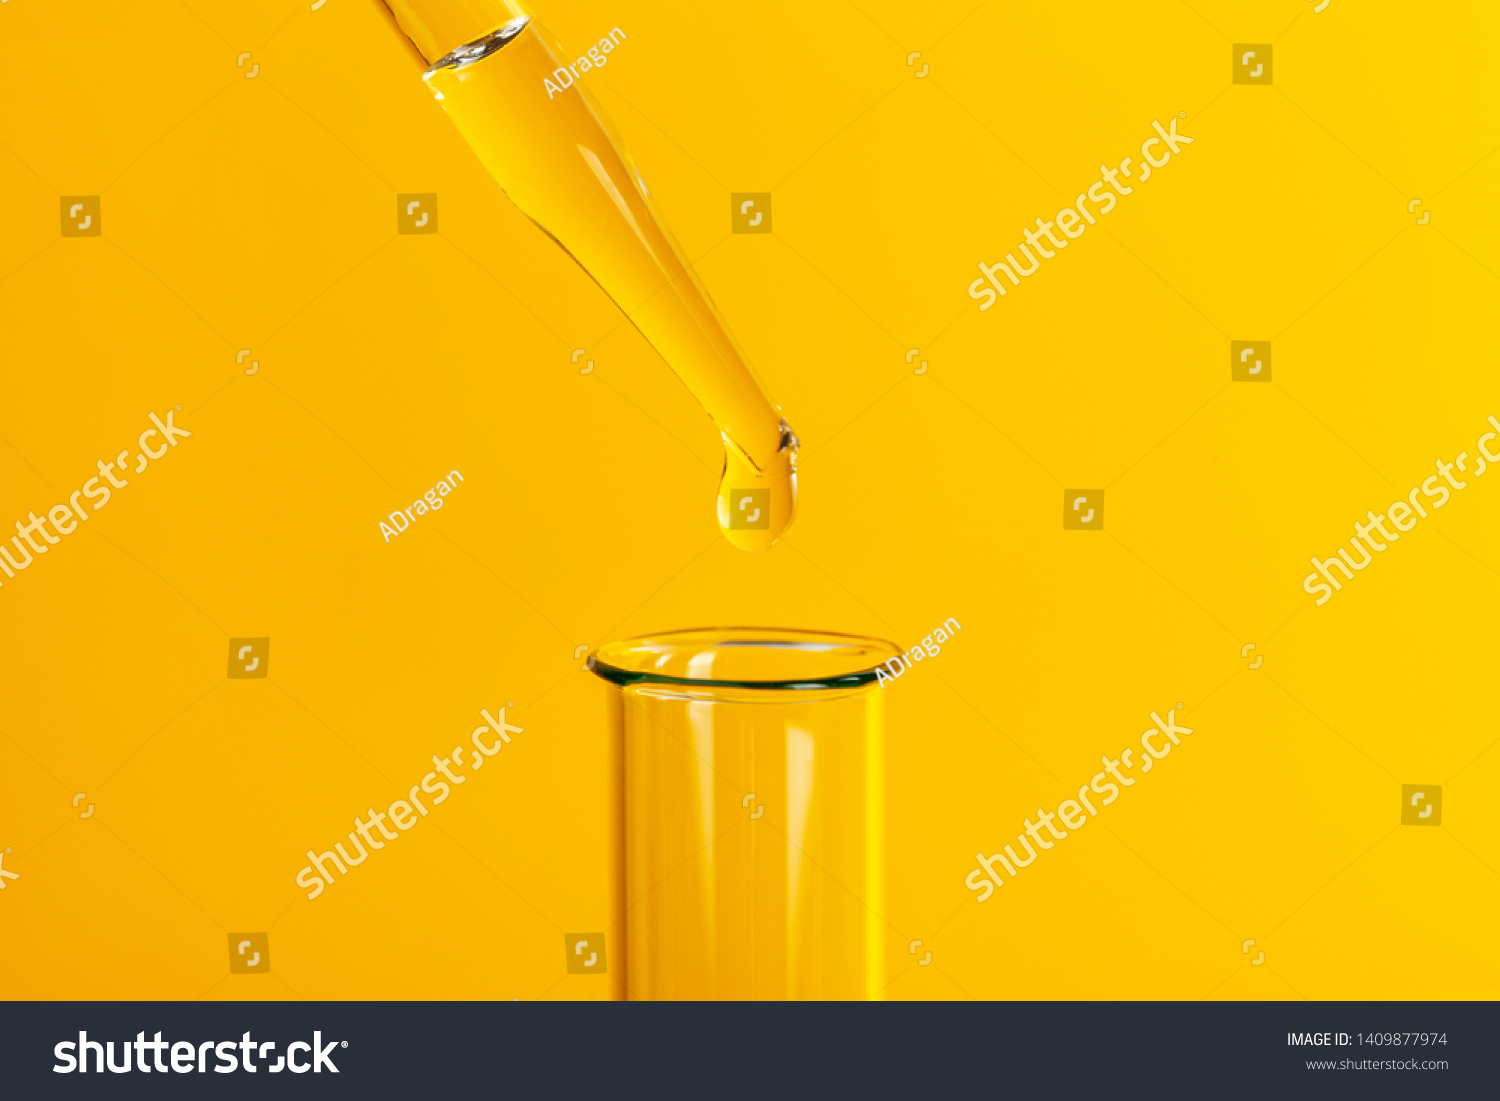 Drop the pipette into the test tube. The study of biological material. Laboratory research. Yellow background #1409877974